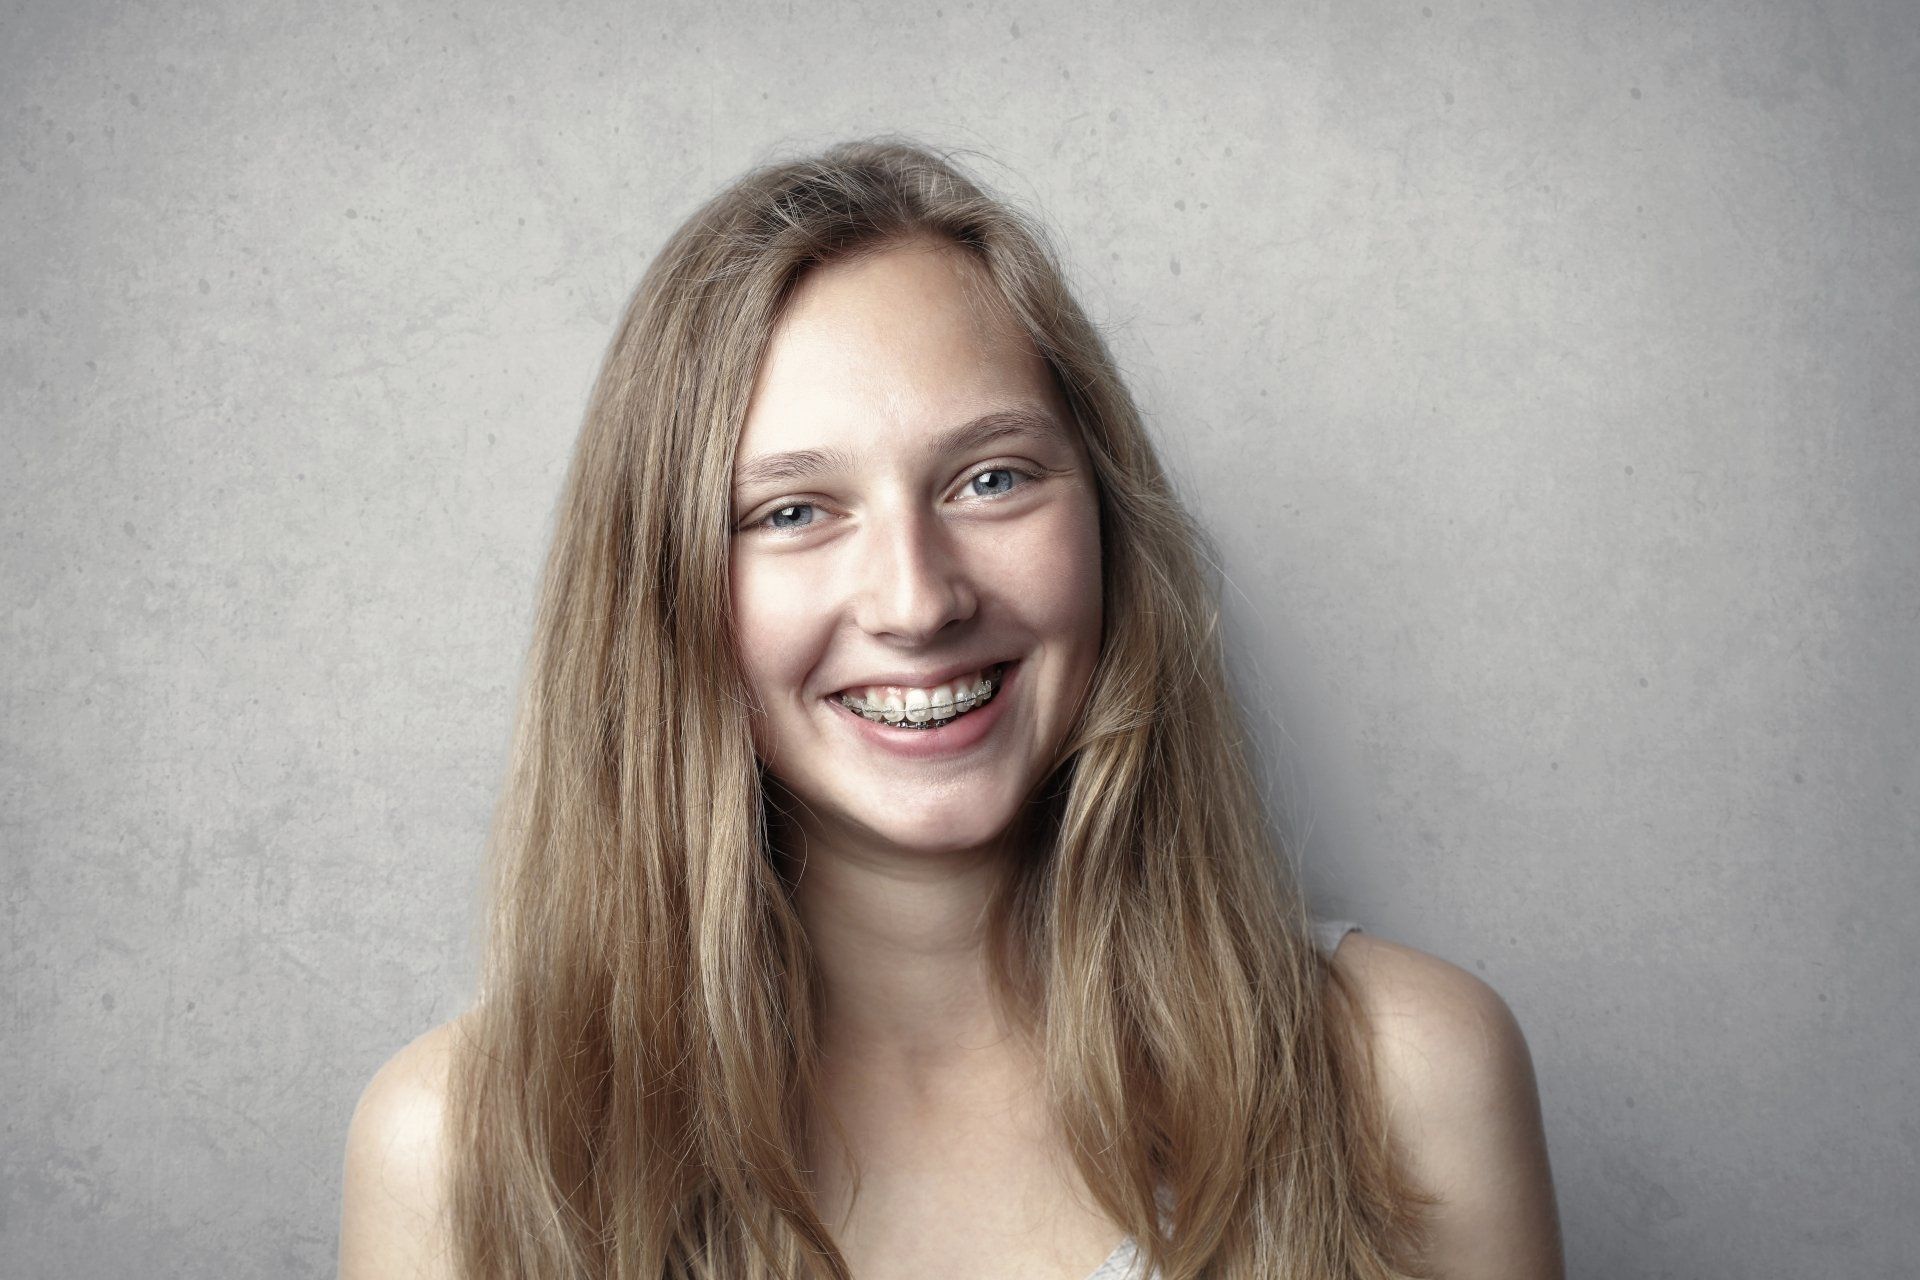 a woman with braces on her teeth smiles for the camera